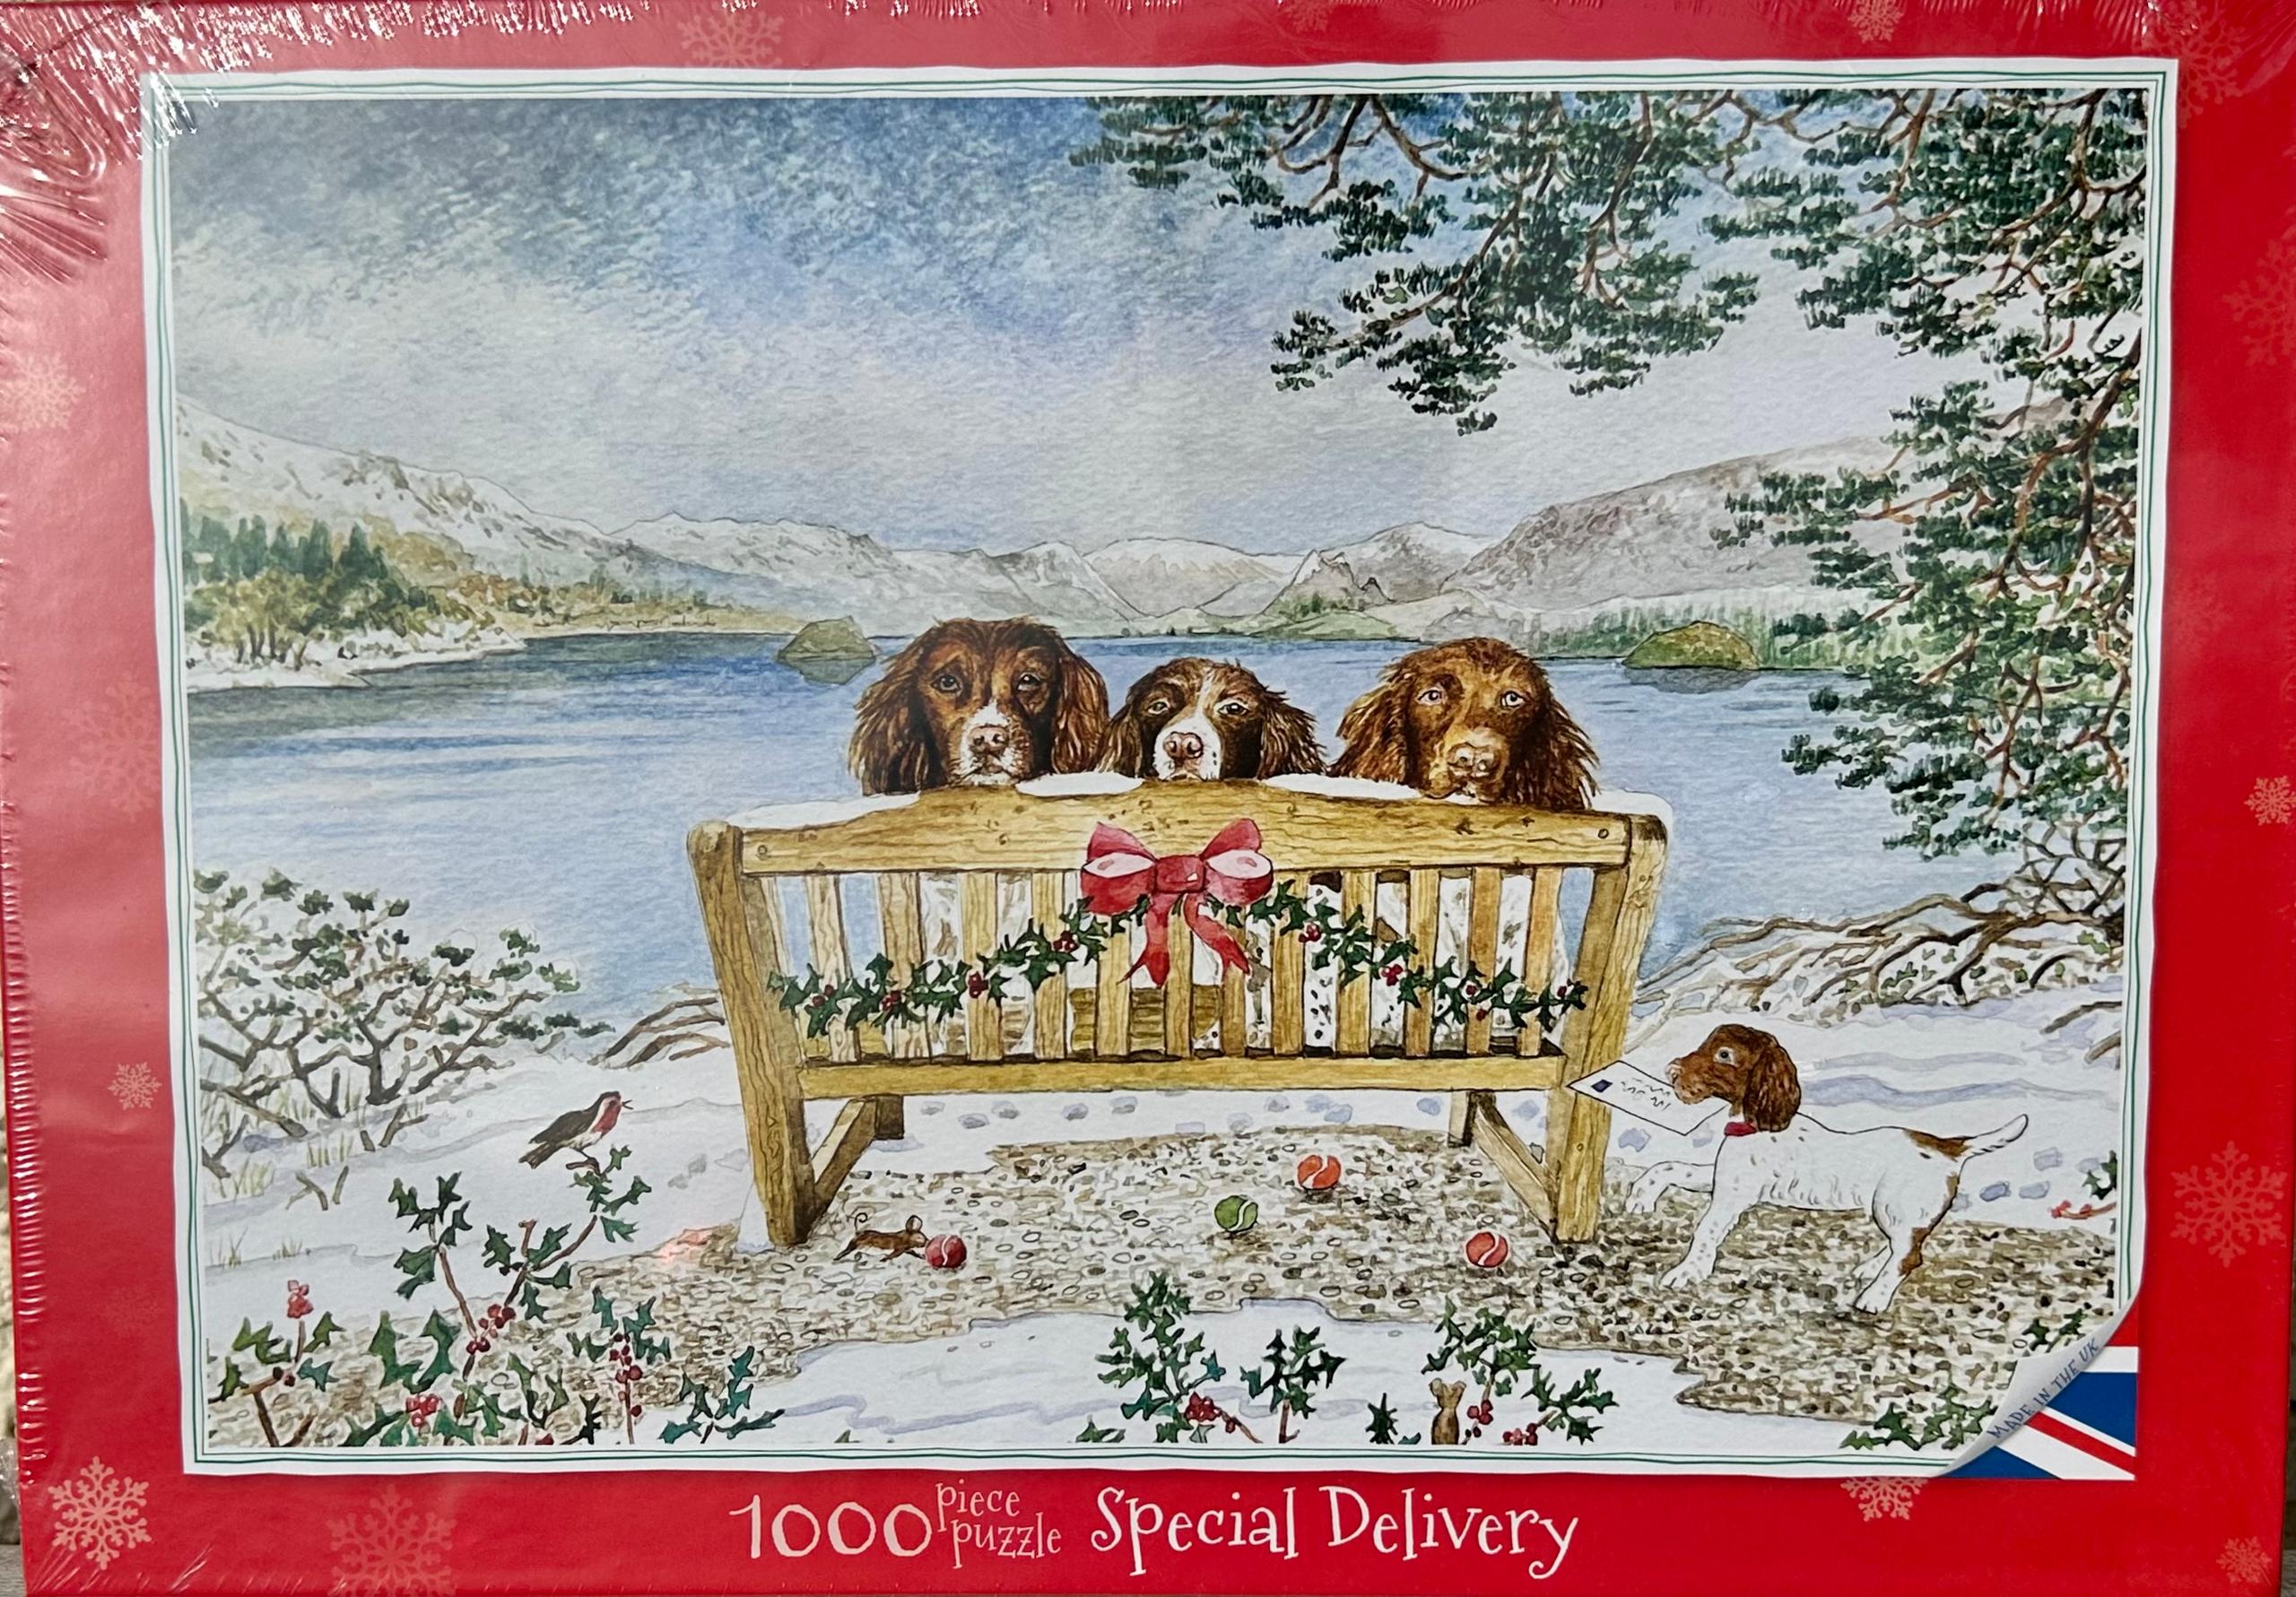 'Special Delivery' 1000 Piece Jigsaw Puzzle